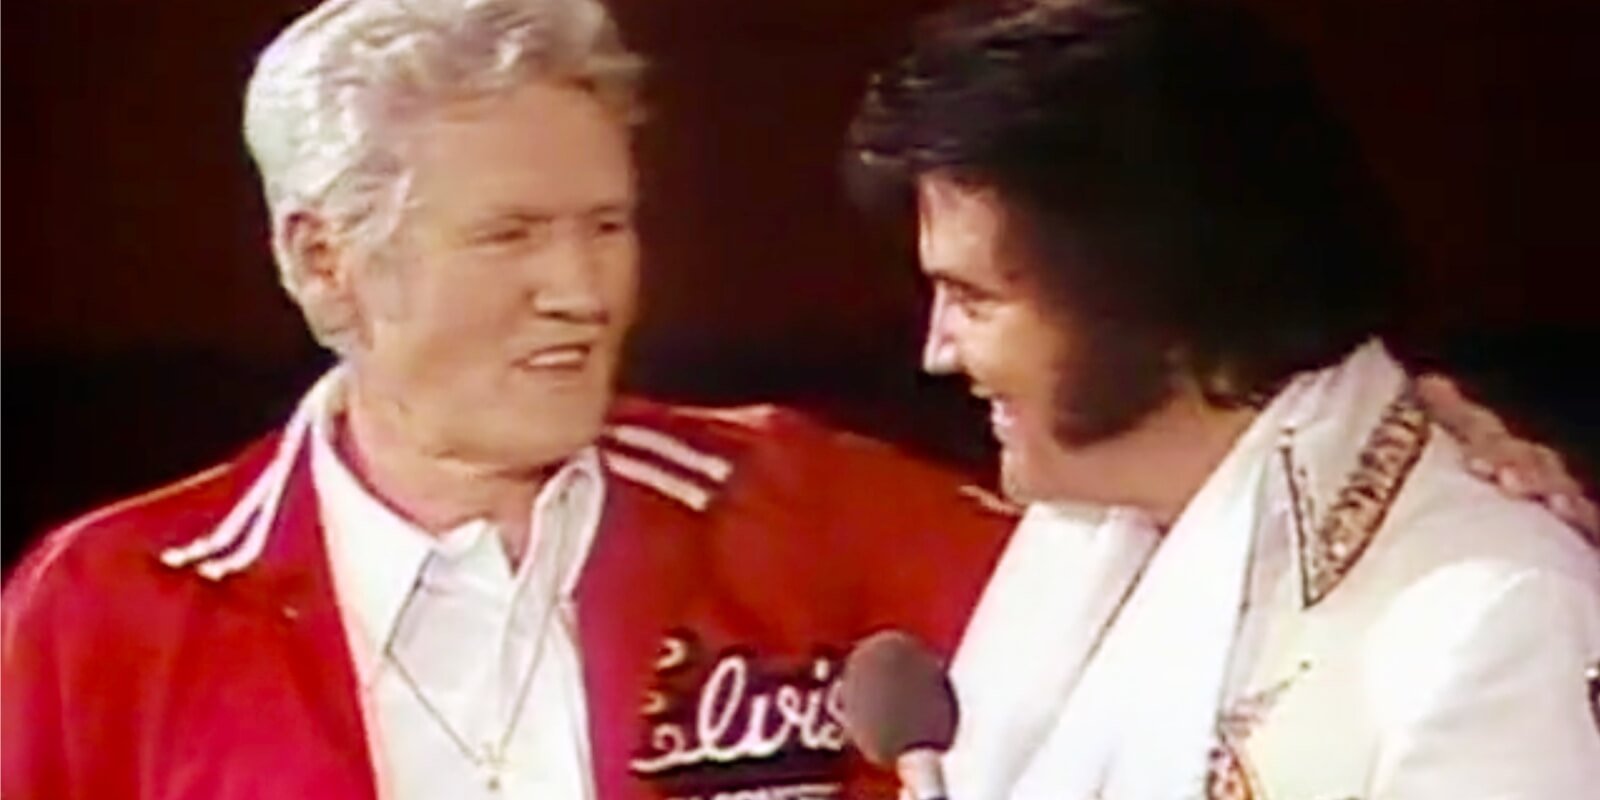 Vernon and Elvis Presley onstage in a frame grab from CBS' 'Elvis in Concert.'